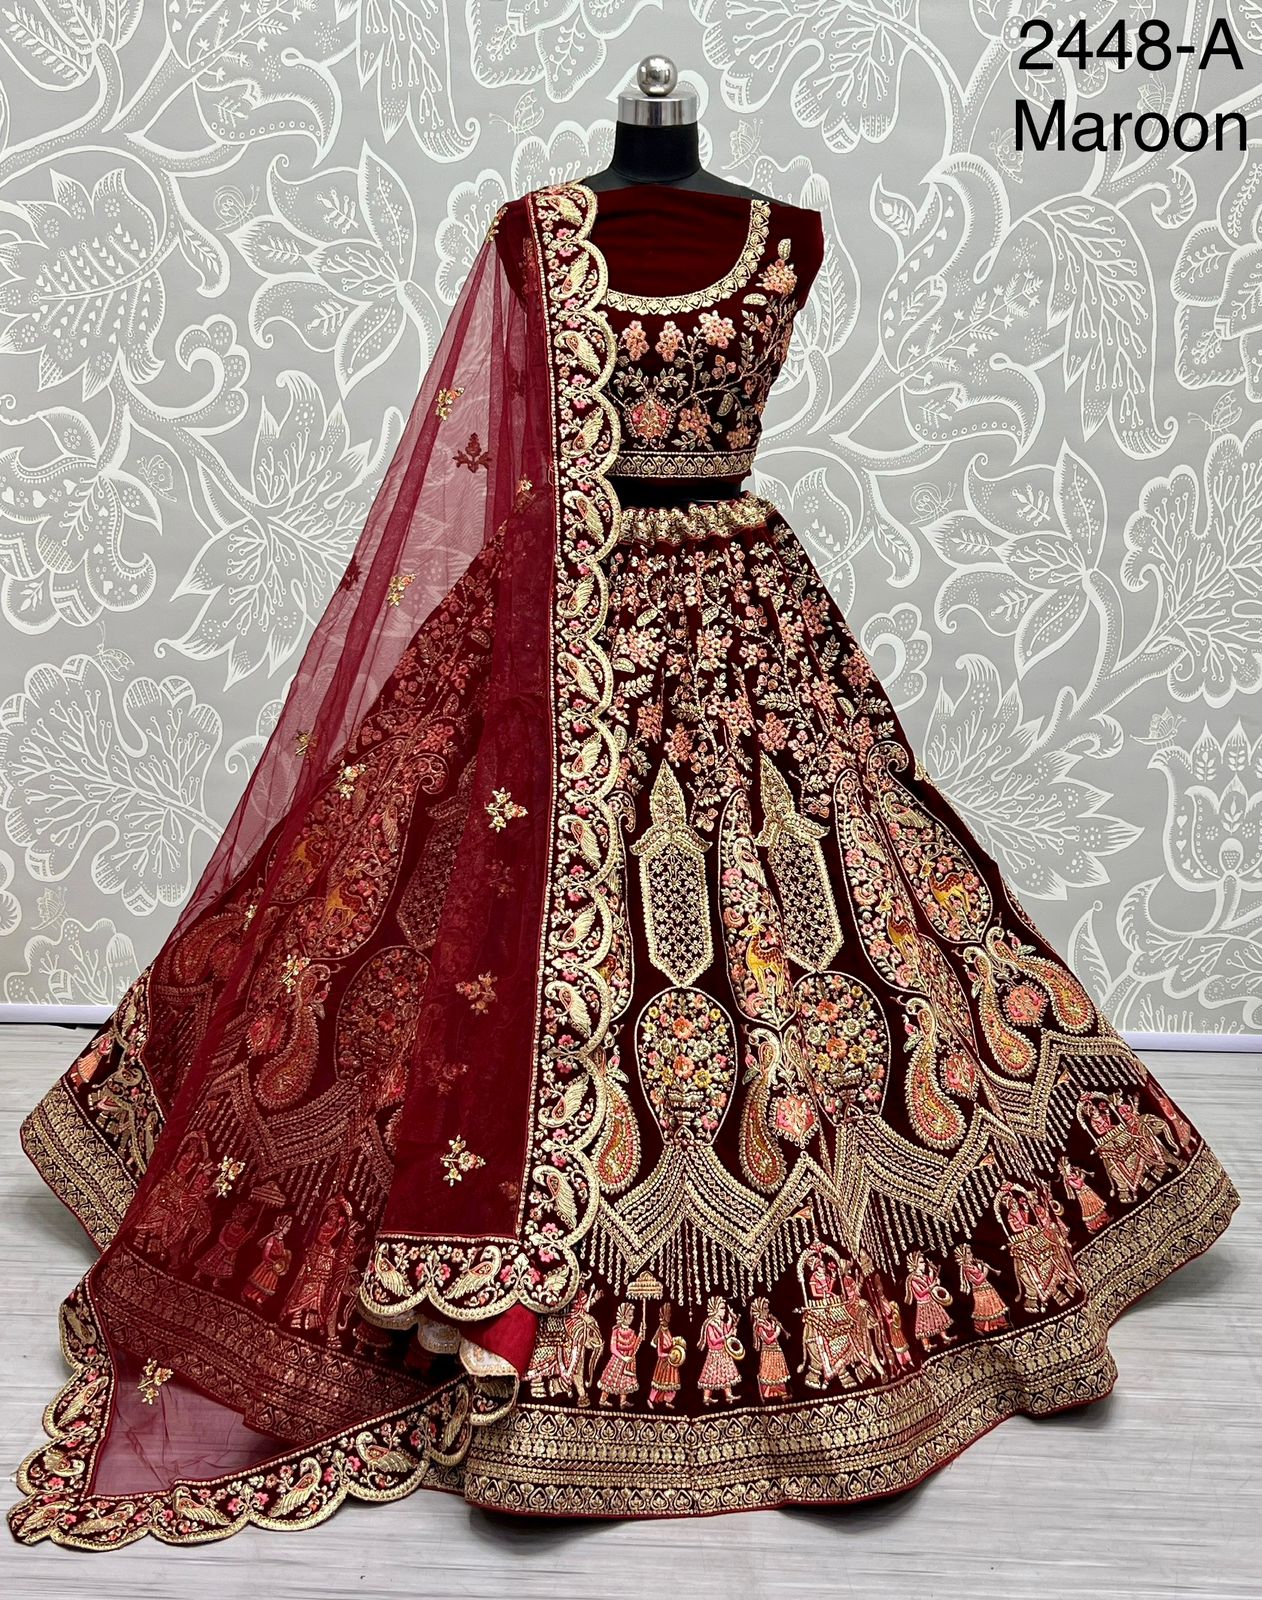 Very well Velvet crafted embroidery of peacock and Bharat designed bridal Lehenga choli 